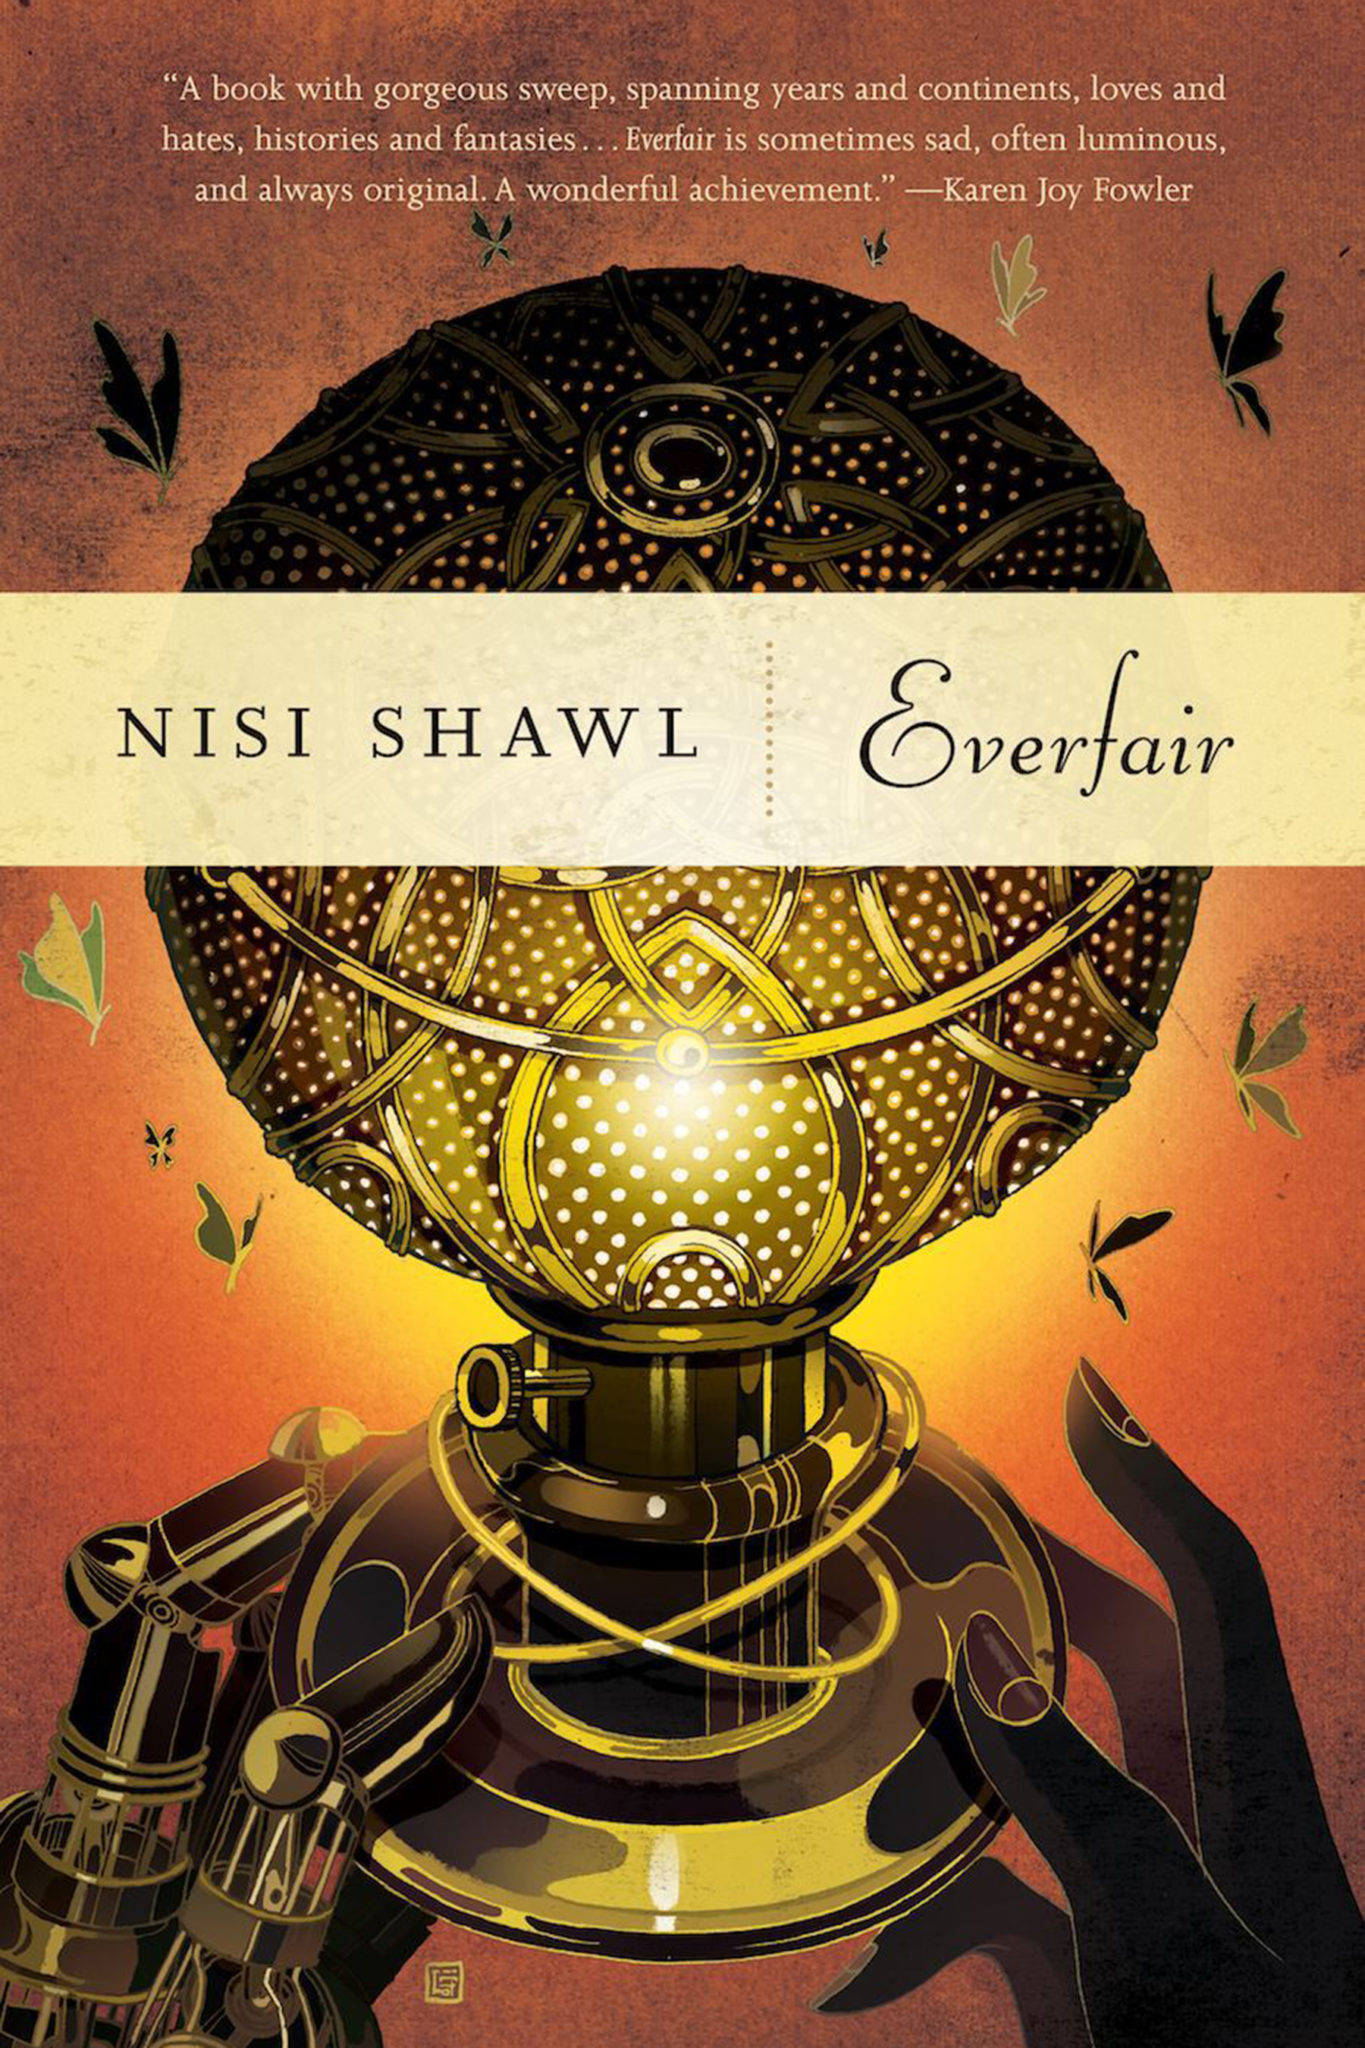 Speculation by Nisi Shawl